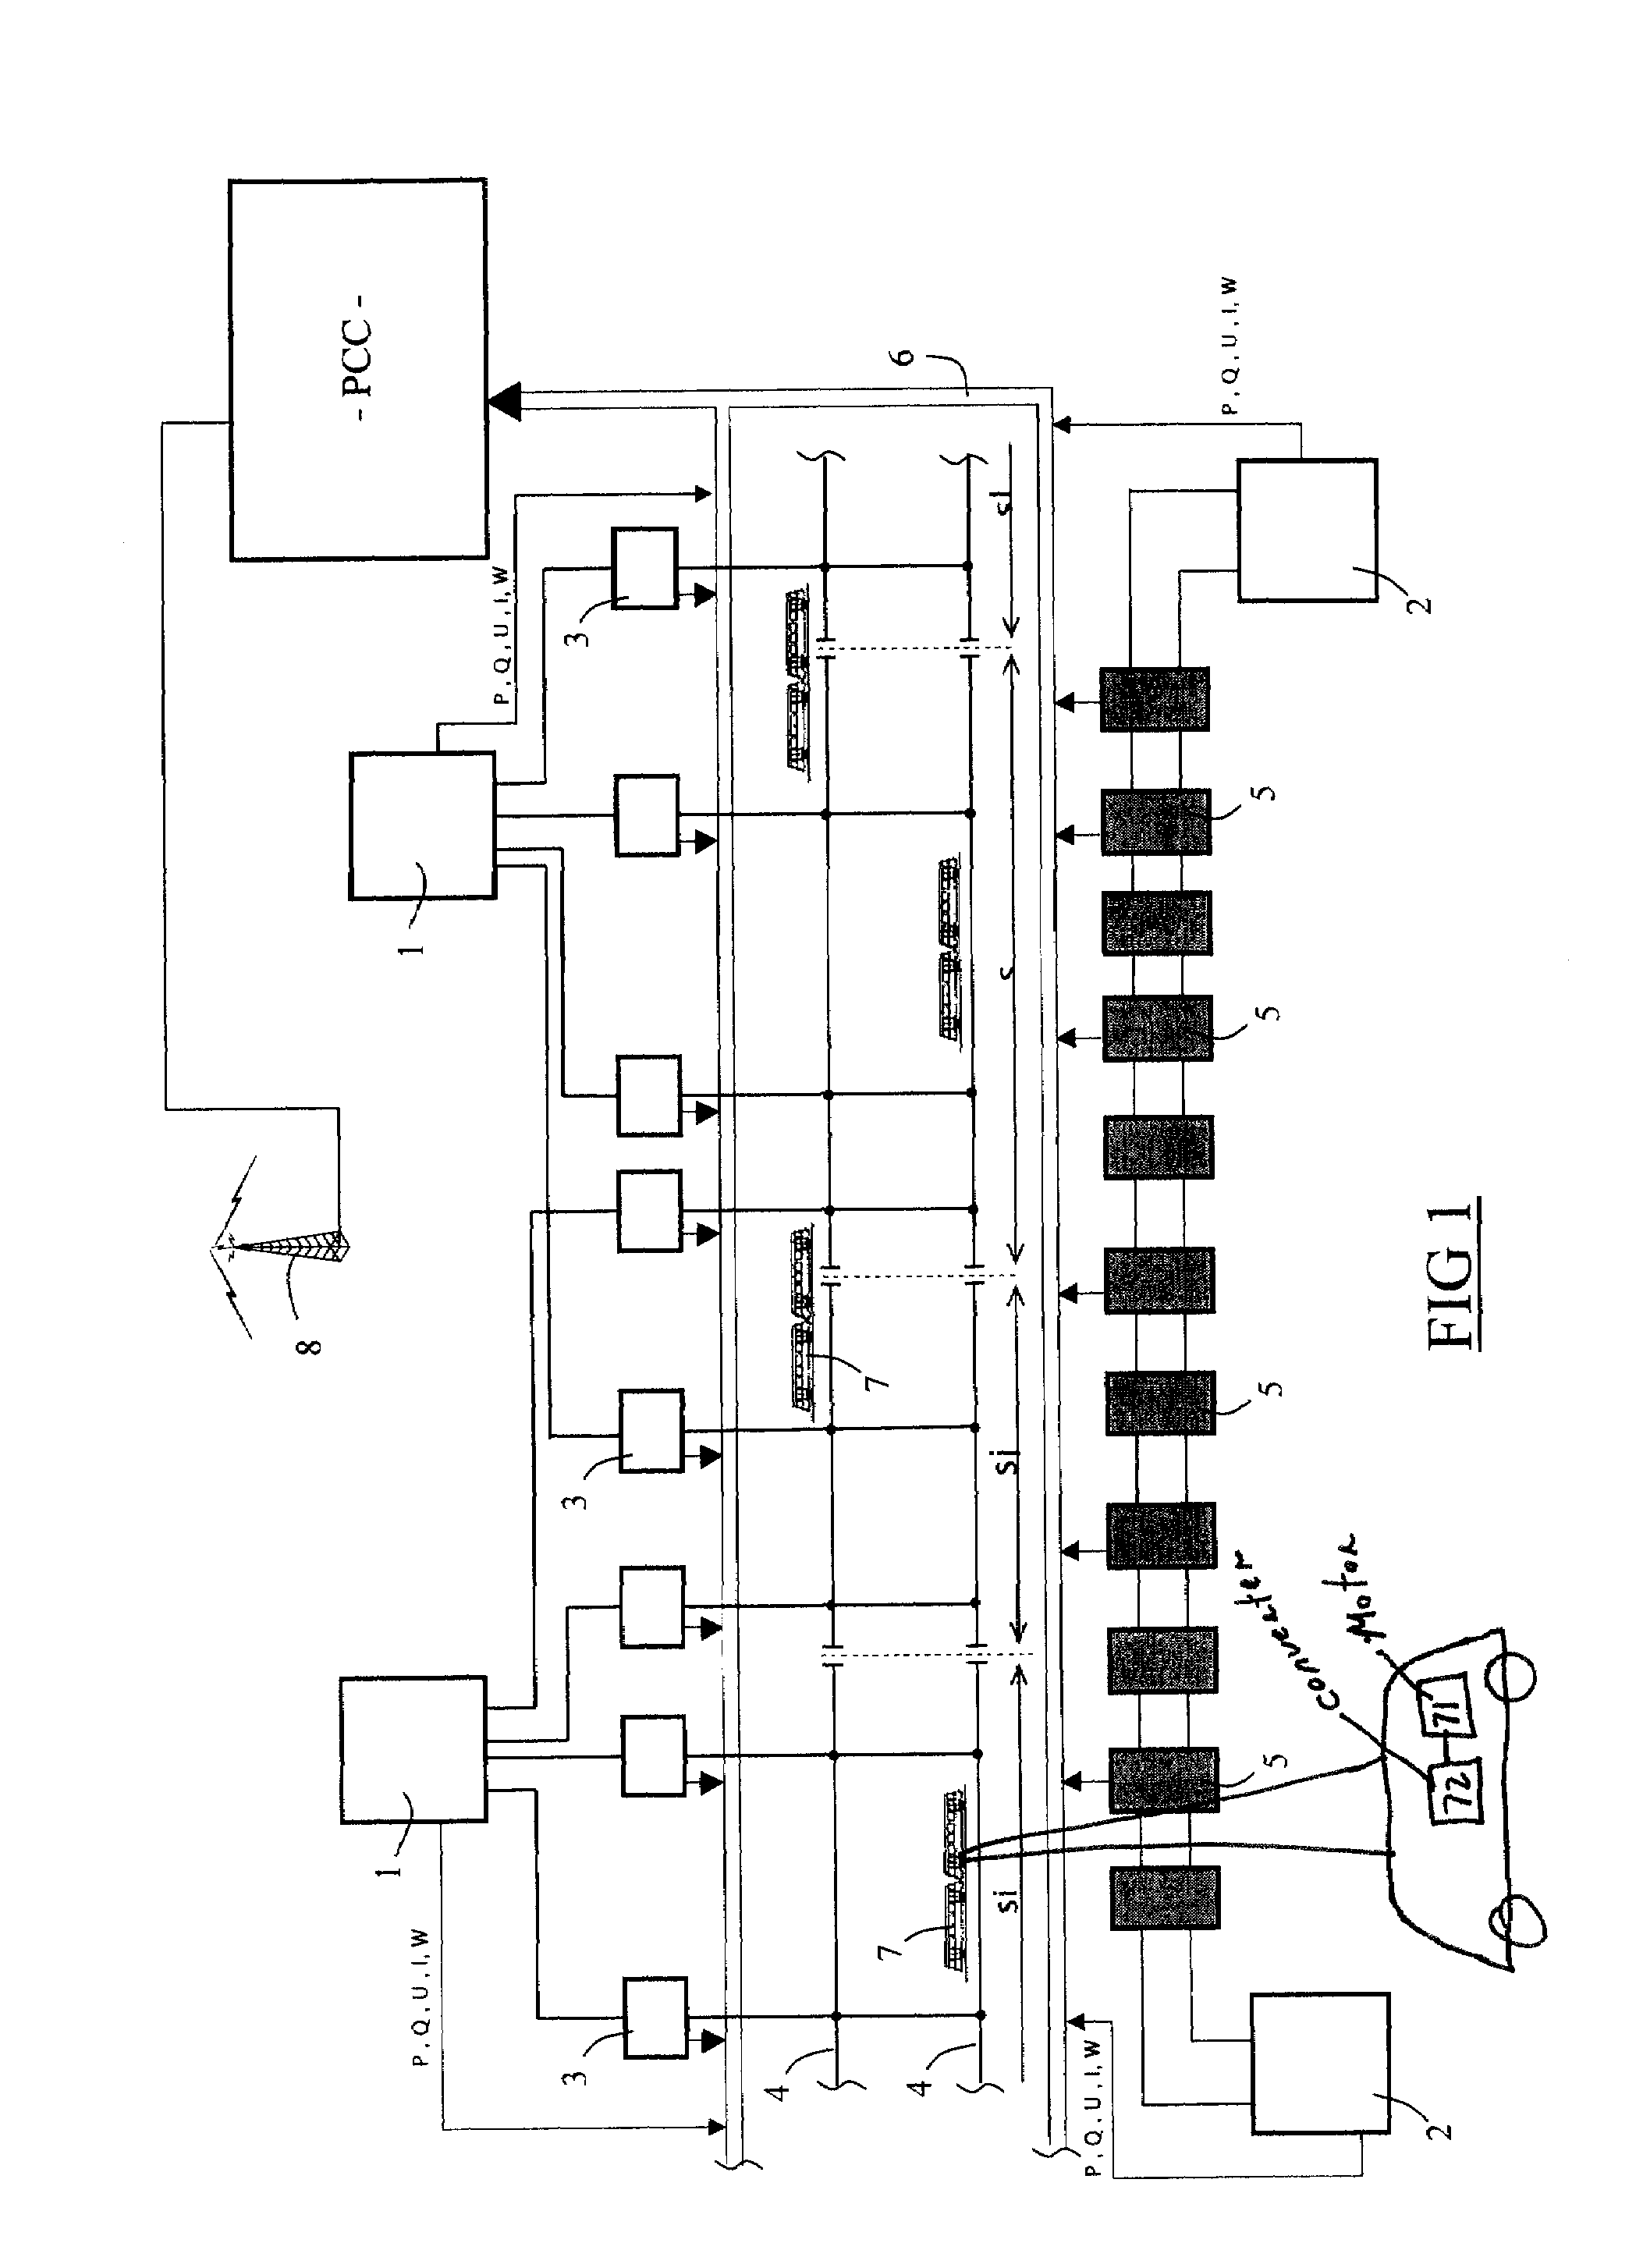 Method and a system for monitoring and regulating the power consumed by a transport system